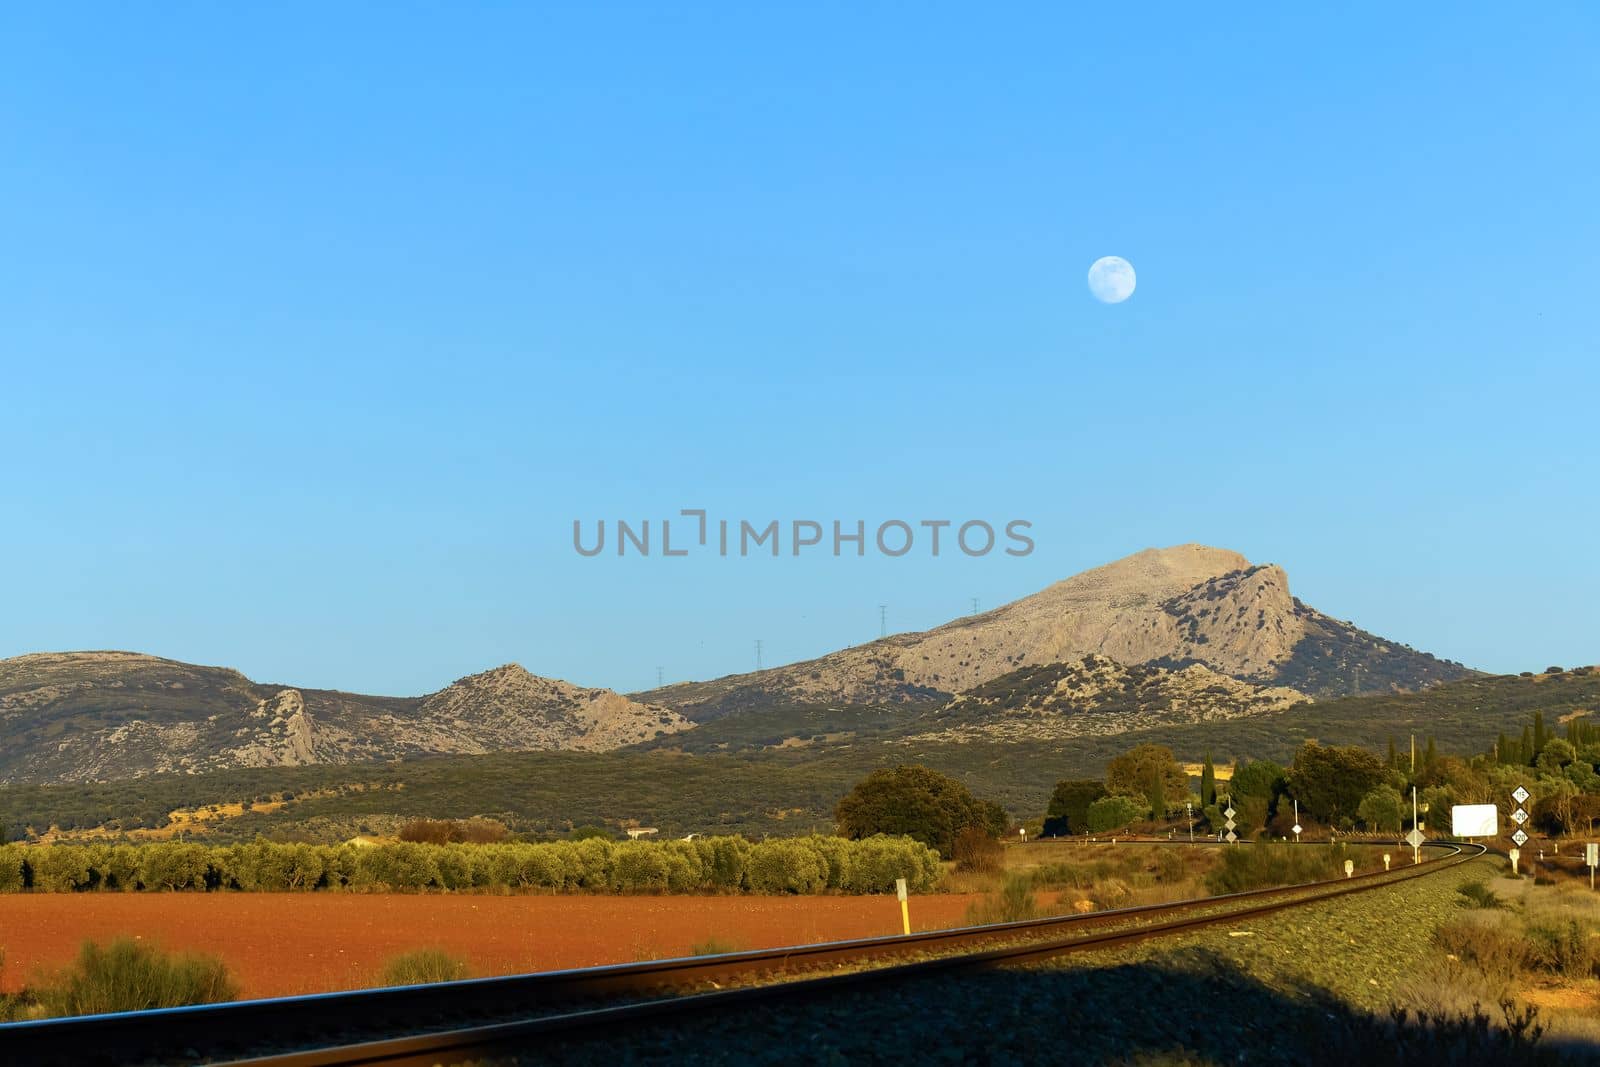 mountain scenery with railroad track and full moon in the background against a blue sky